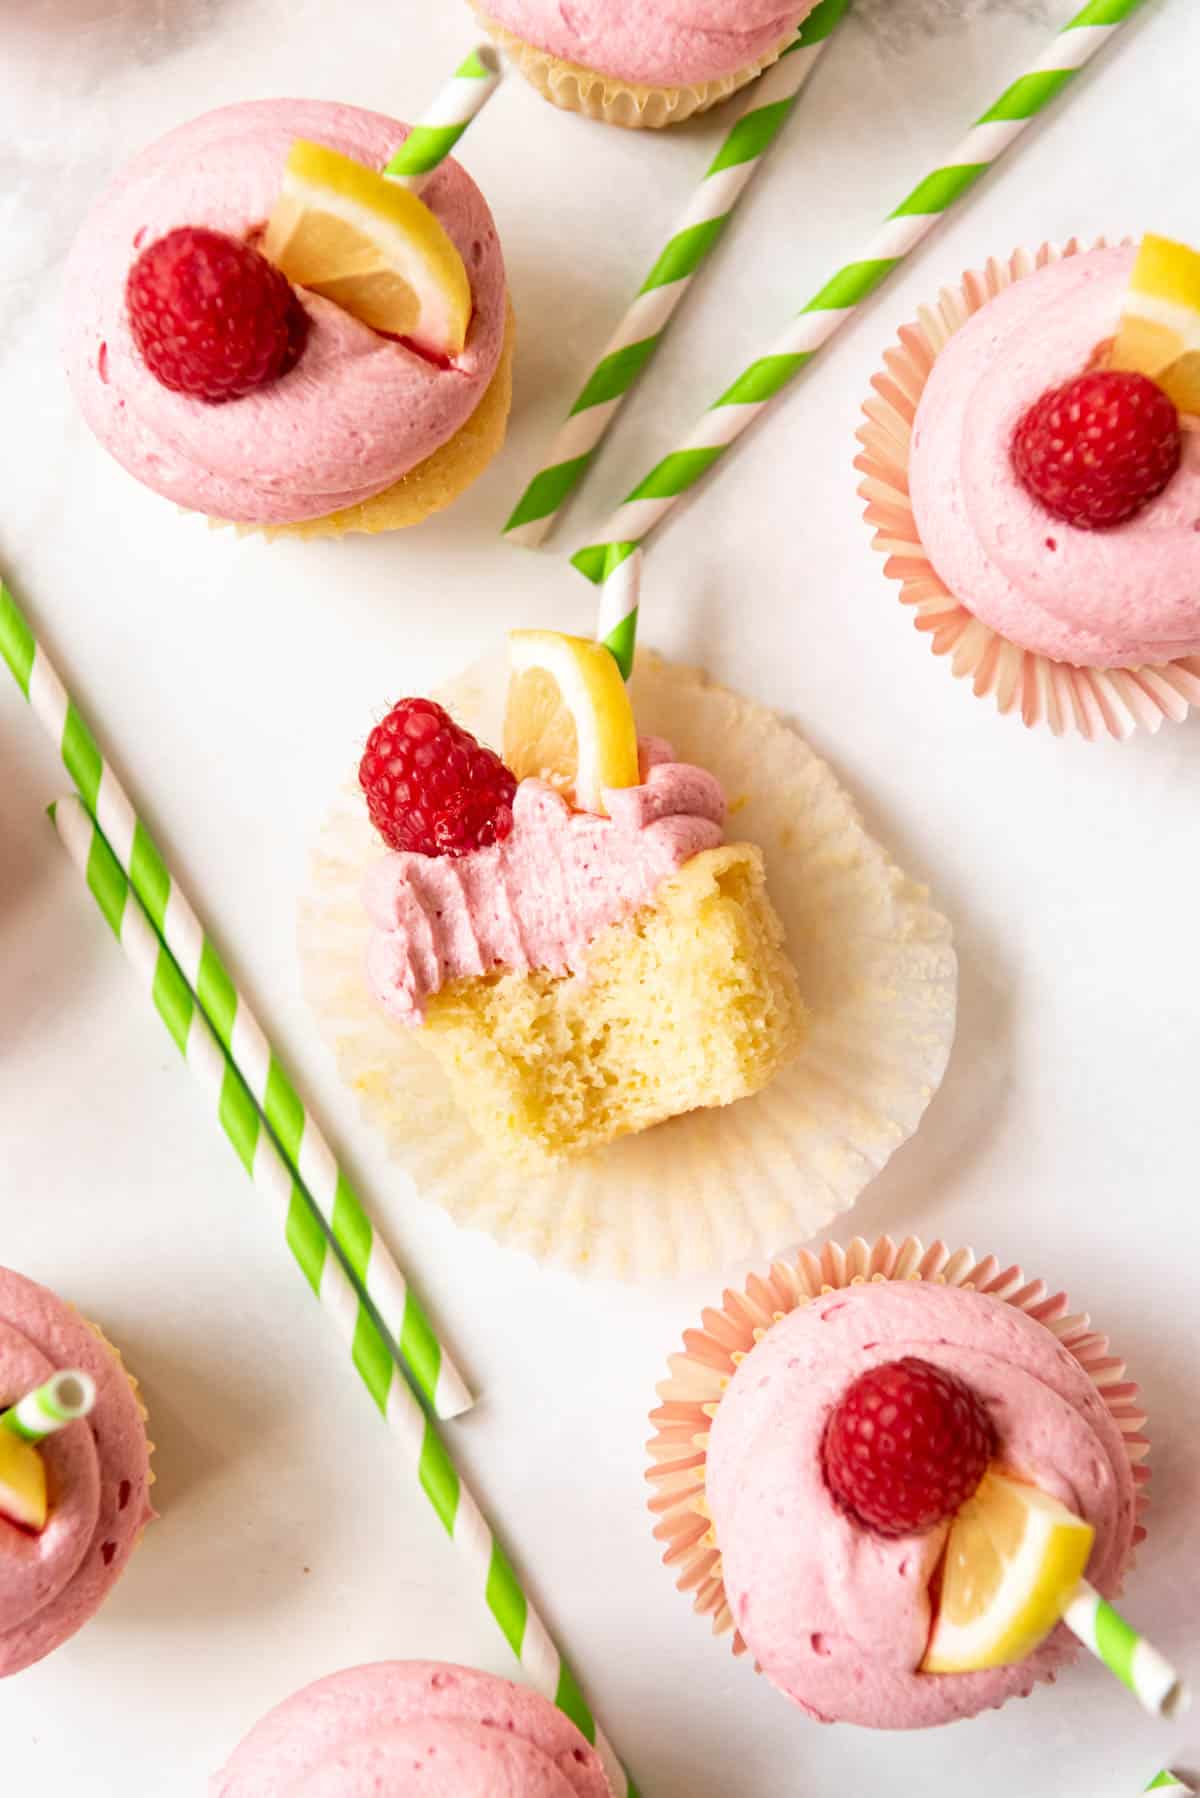 Top view of a Raspberry Lemonade Cupcake cutt in half on a white surface with other Raspberry lemonade cupcakes next to it.